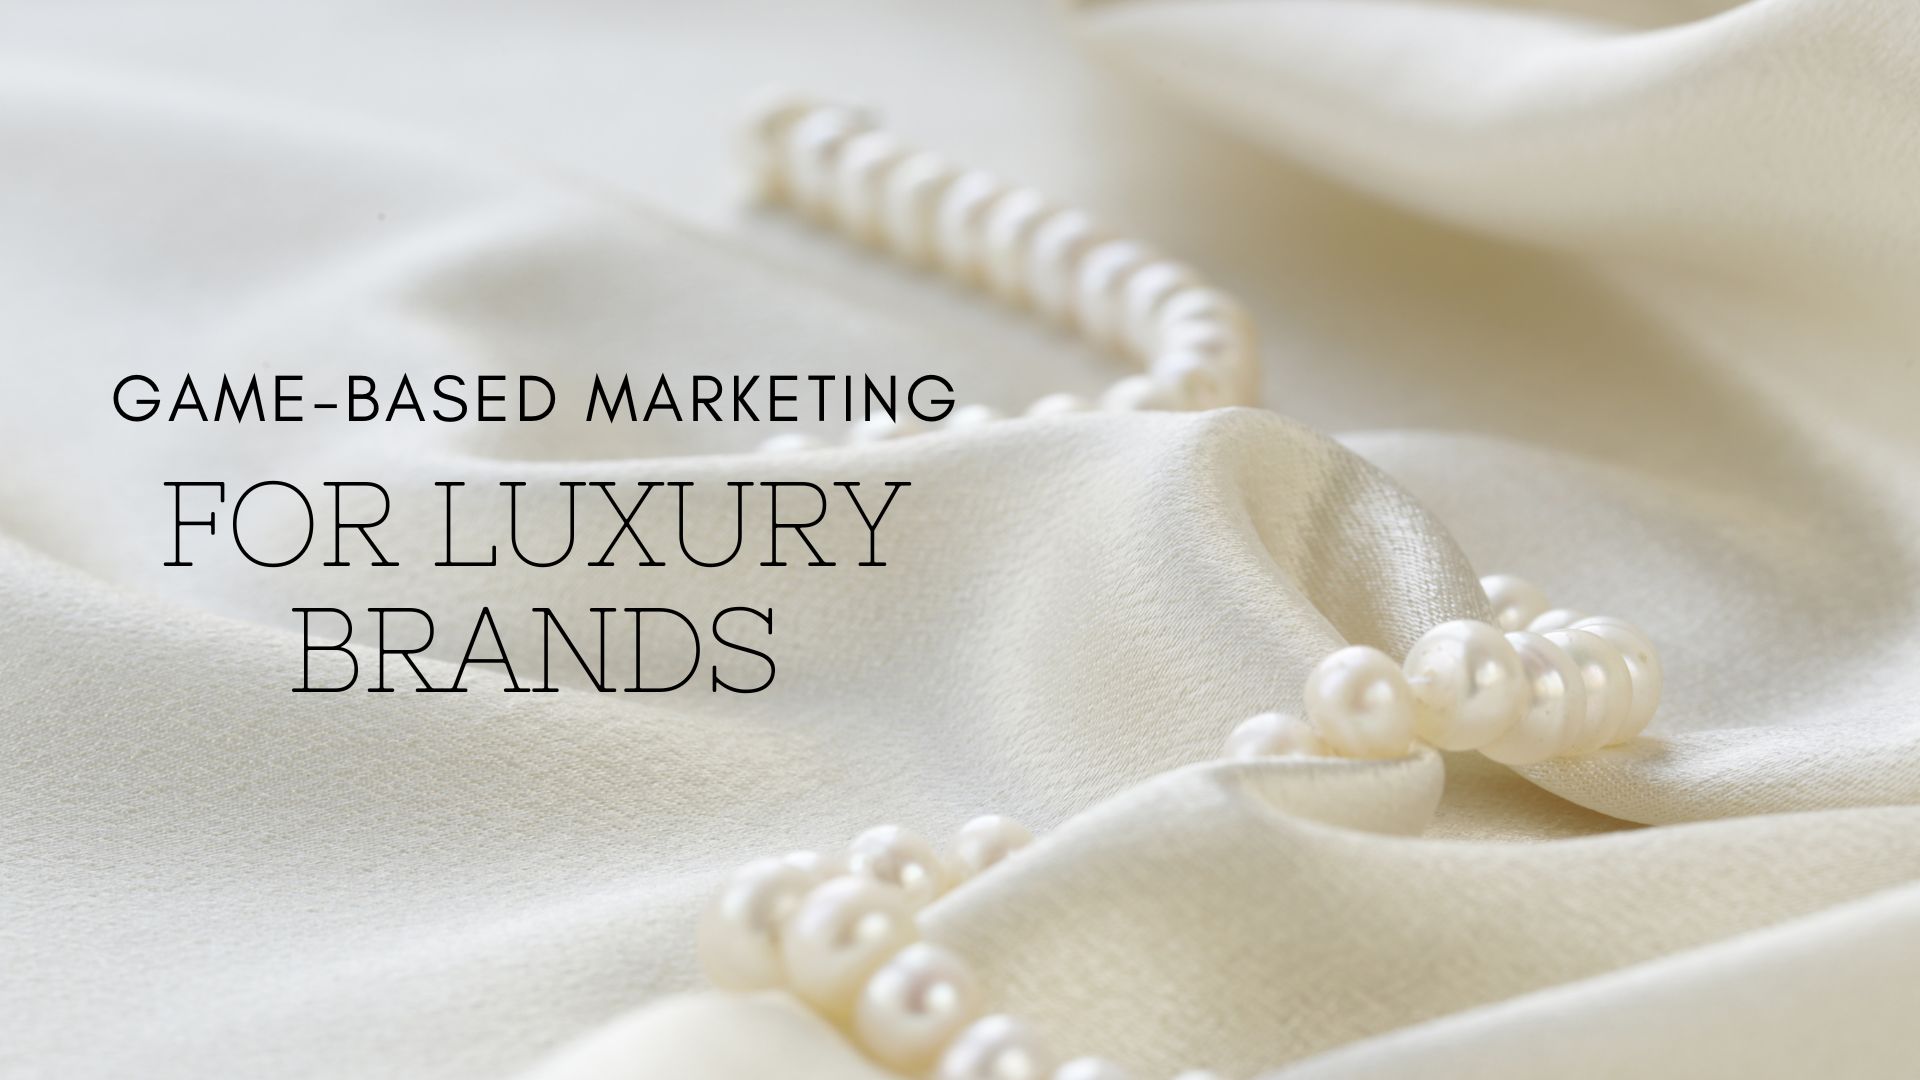 Game-based Marketing for Luxury Brands